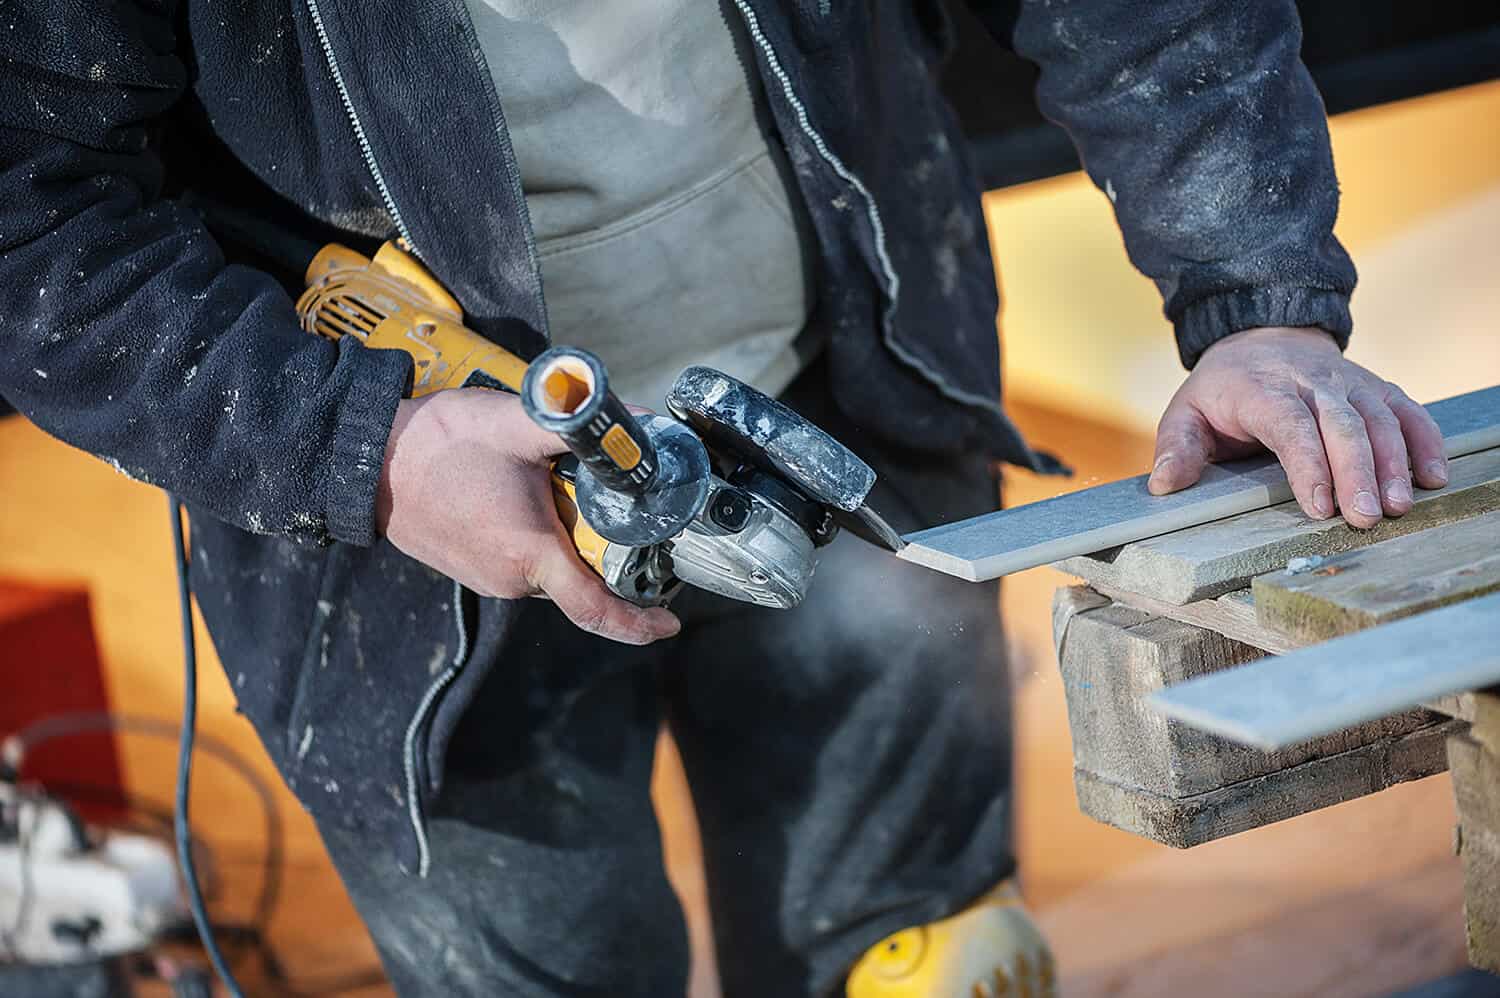 Things to Consider When Cutting Tiles With an Angle Grinder